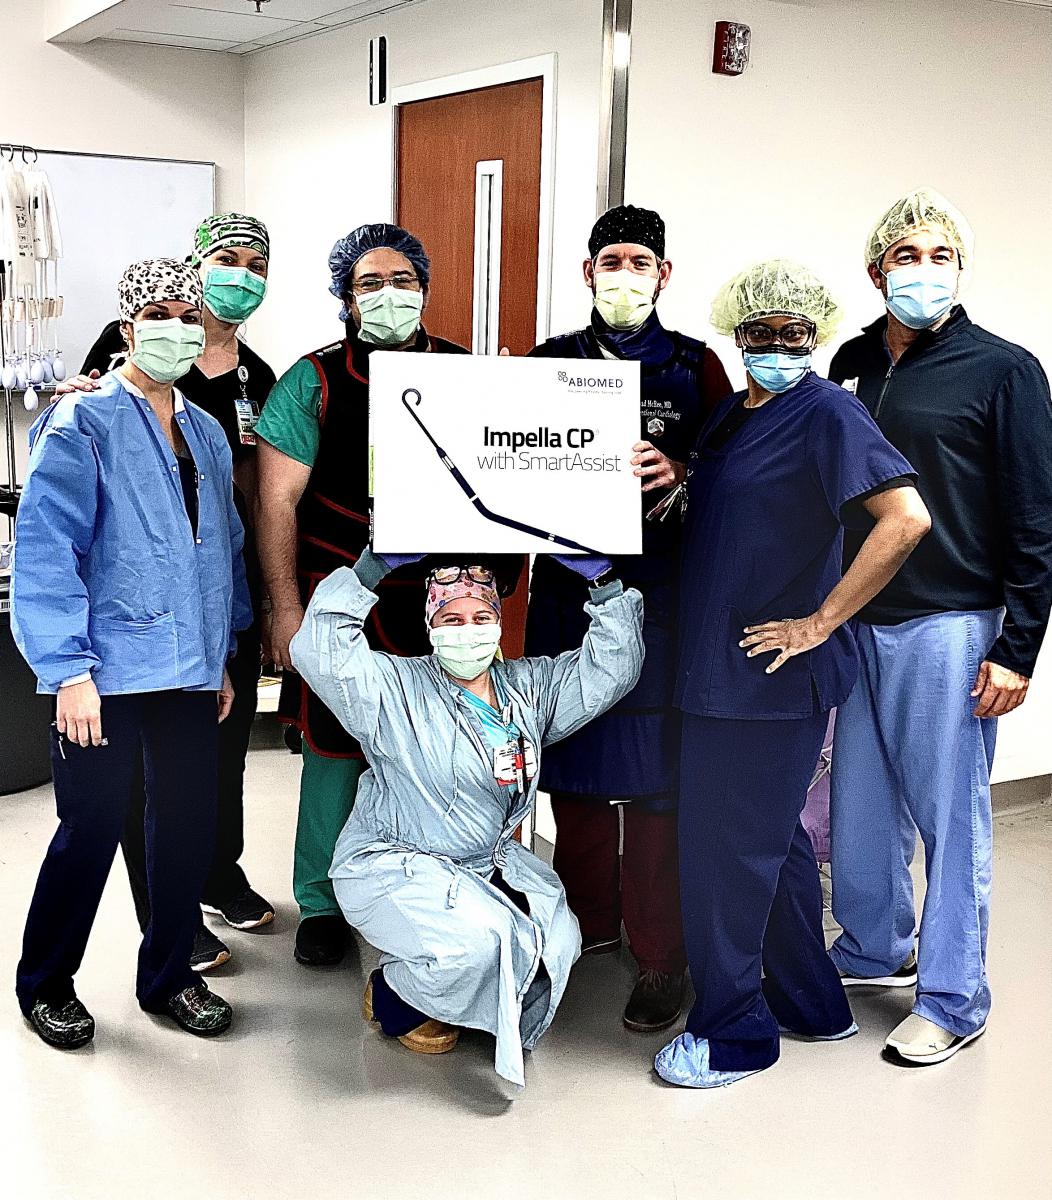 Dr. Chad McRee, Dr. Kareem Bedeir, and the Cath Lab team at Mobile Infirmary